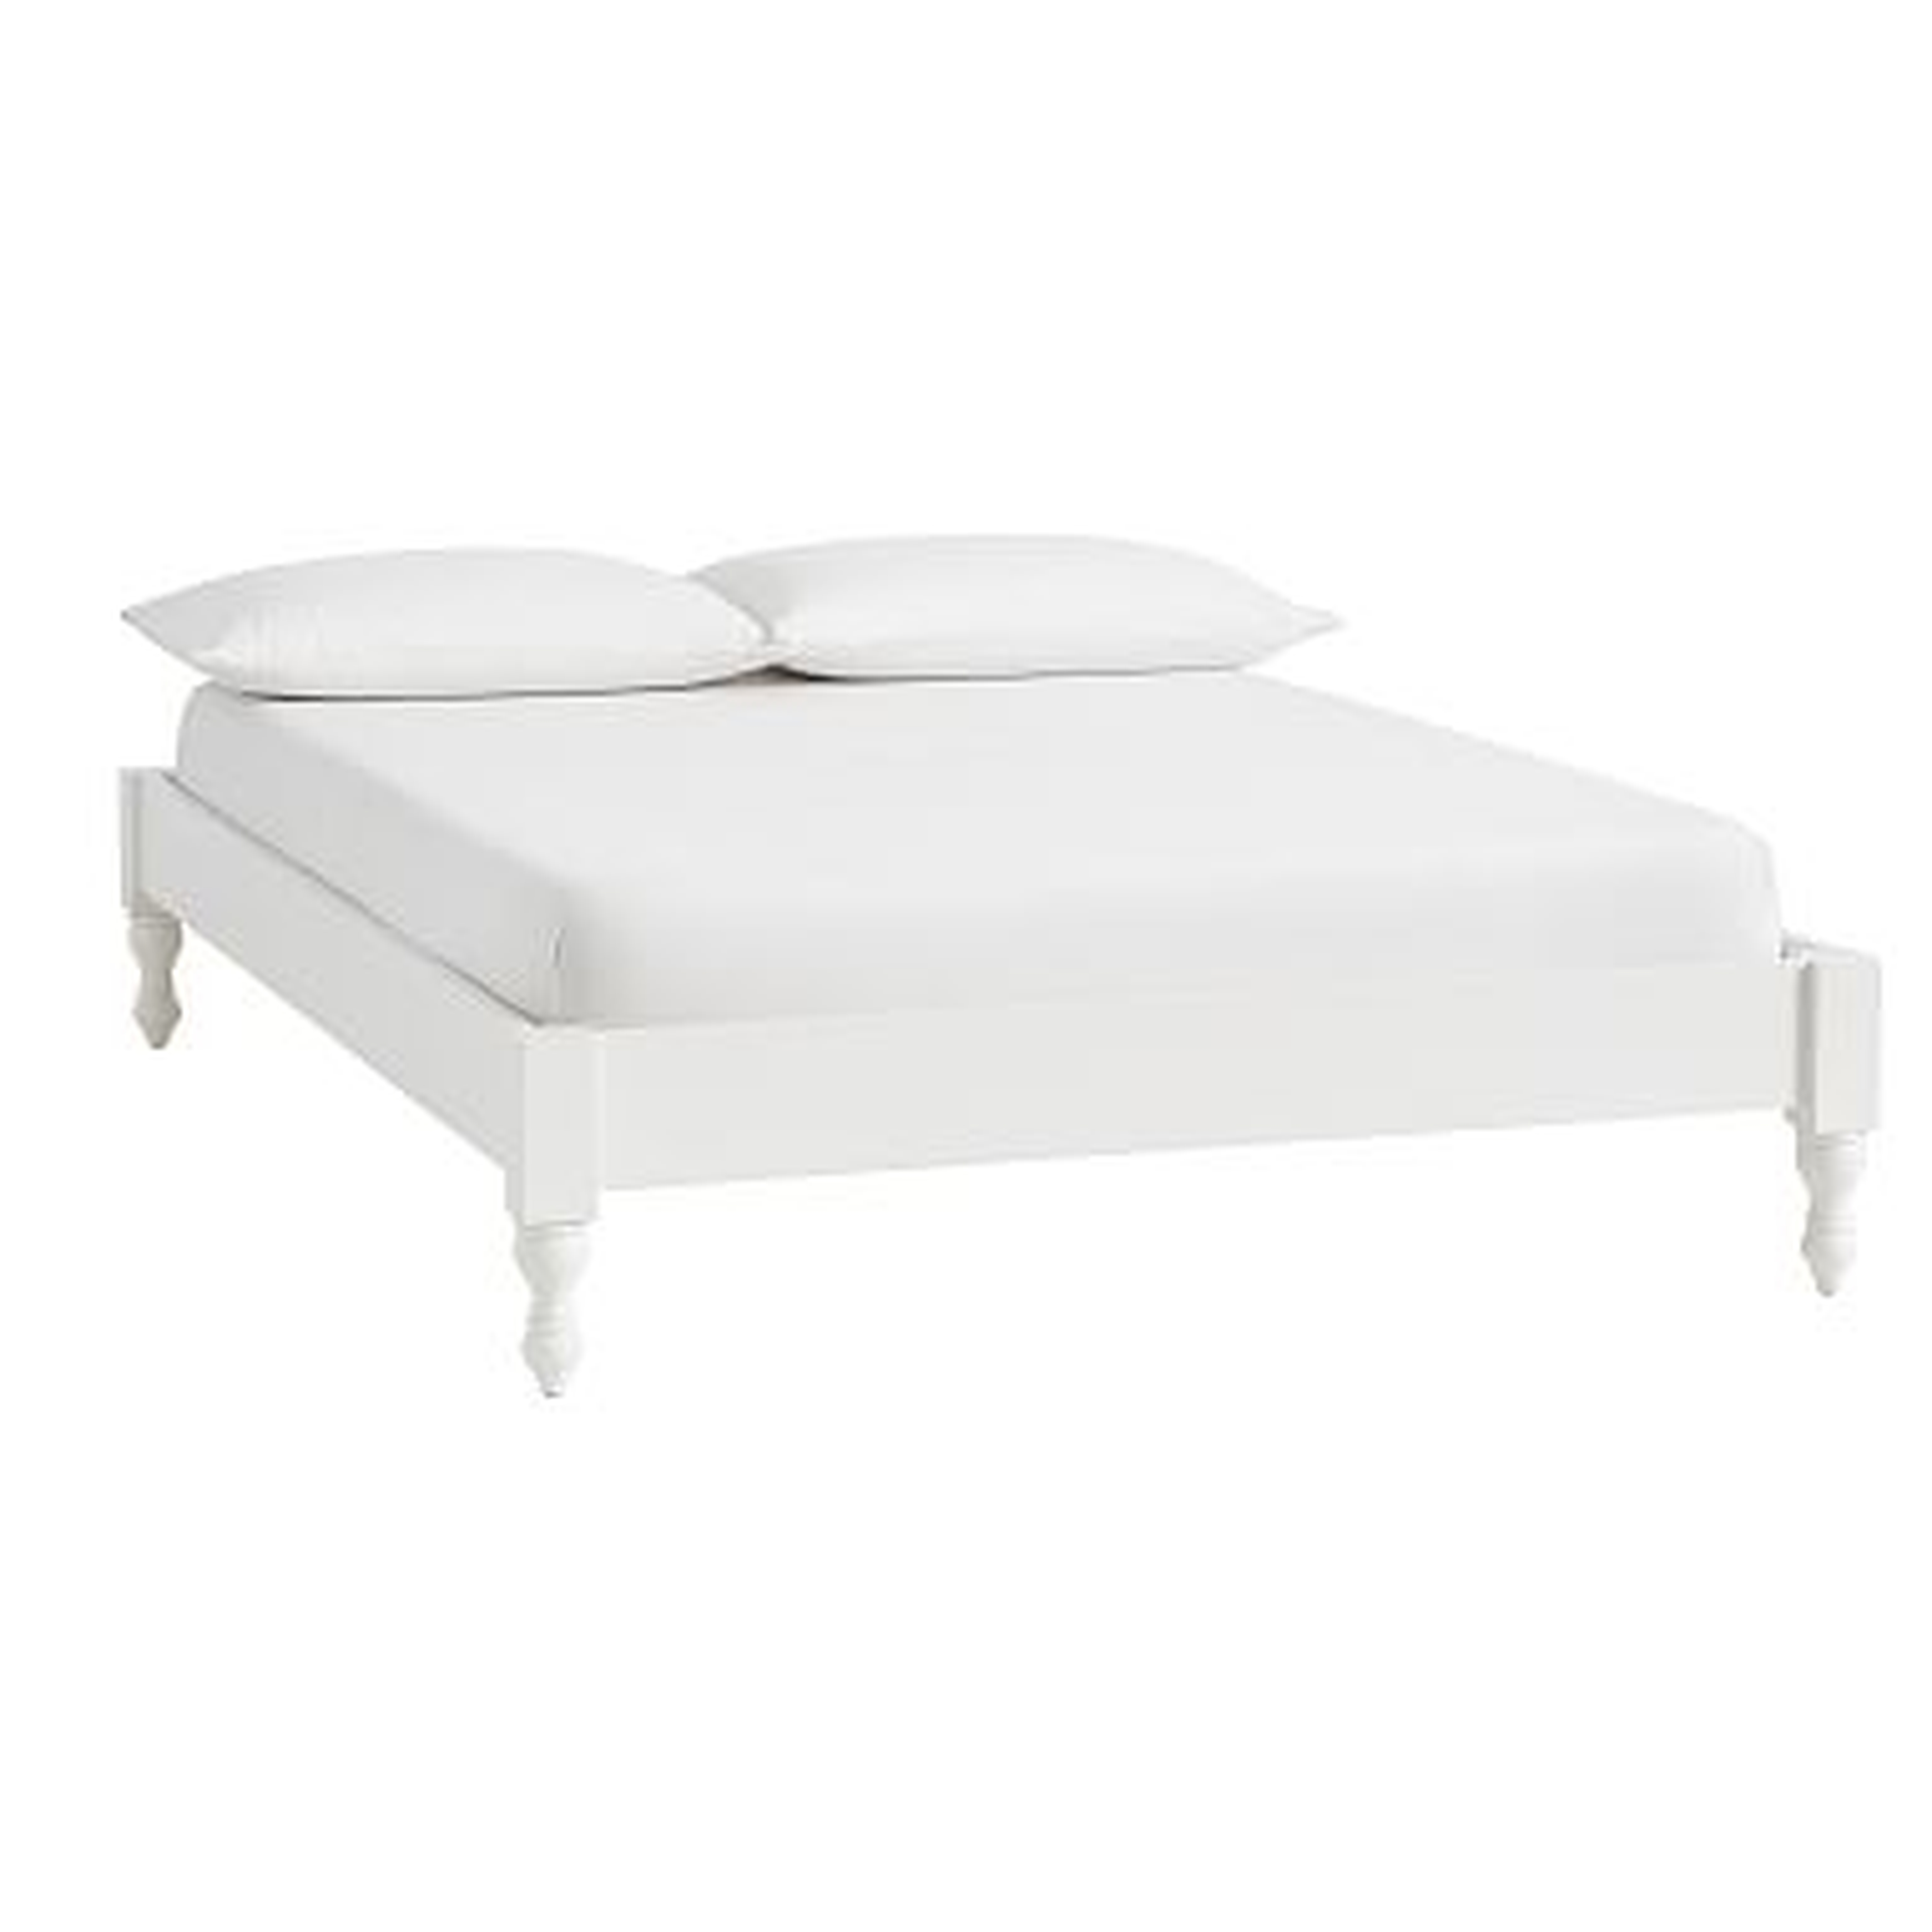 Bellevue Platform Bed, Twin, Simply White - Pottery Barn Teen